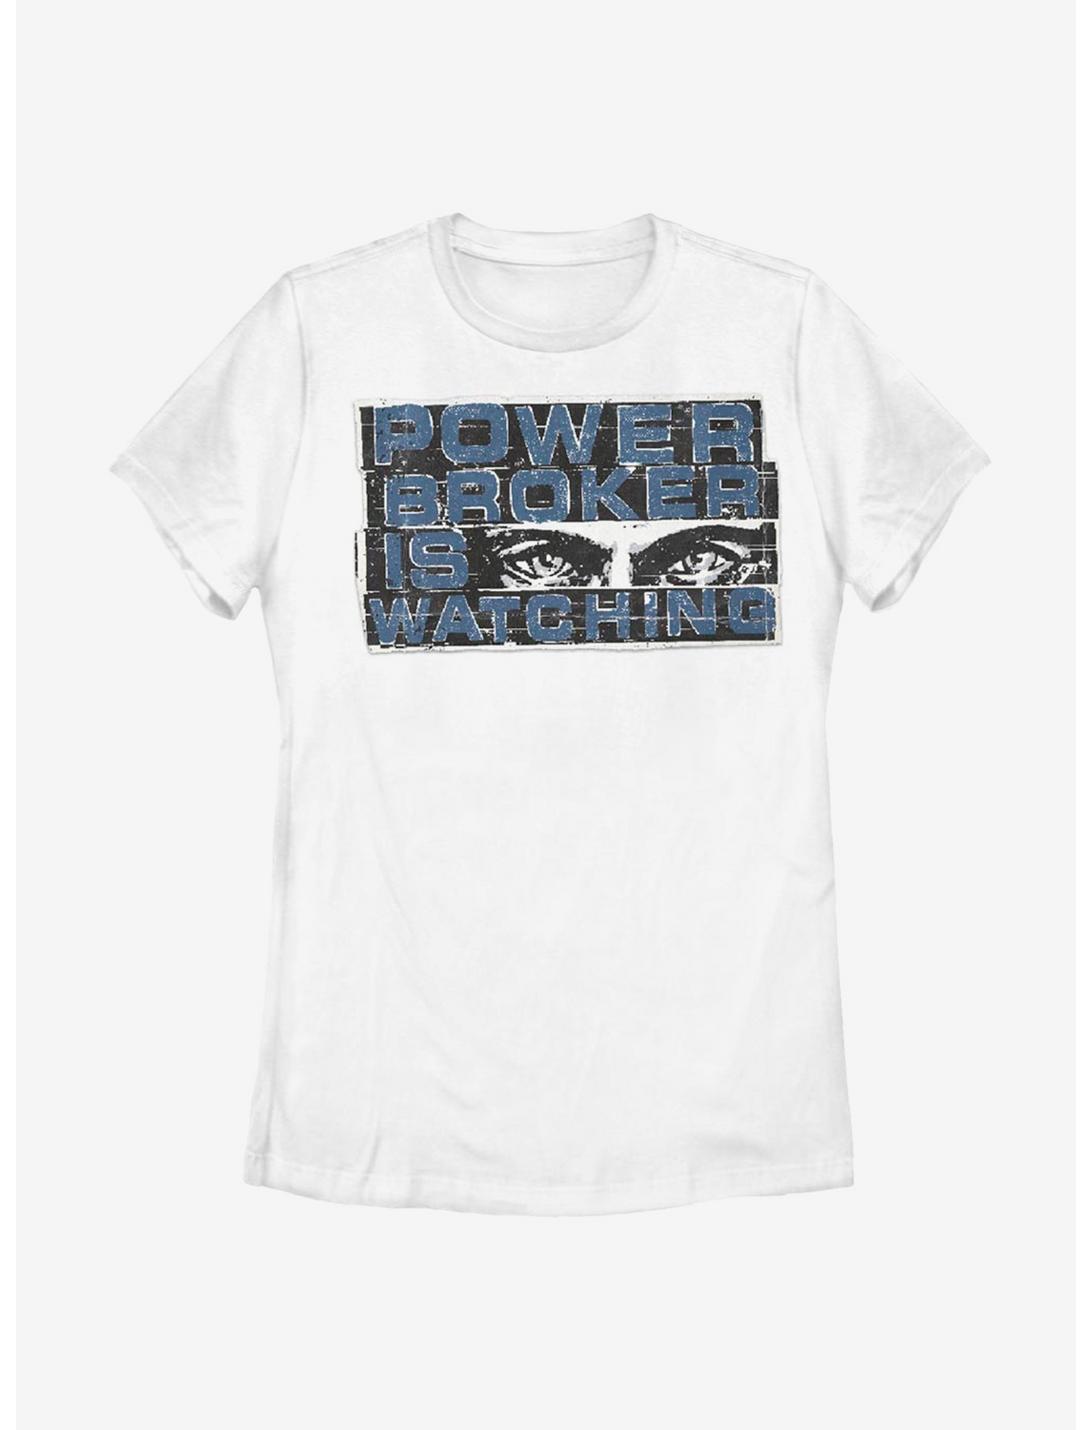 Marvel The Falcon And The Winter Soldier Power Broker Womens T-Shirt, WHITE, hi-res